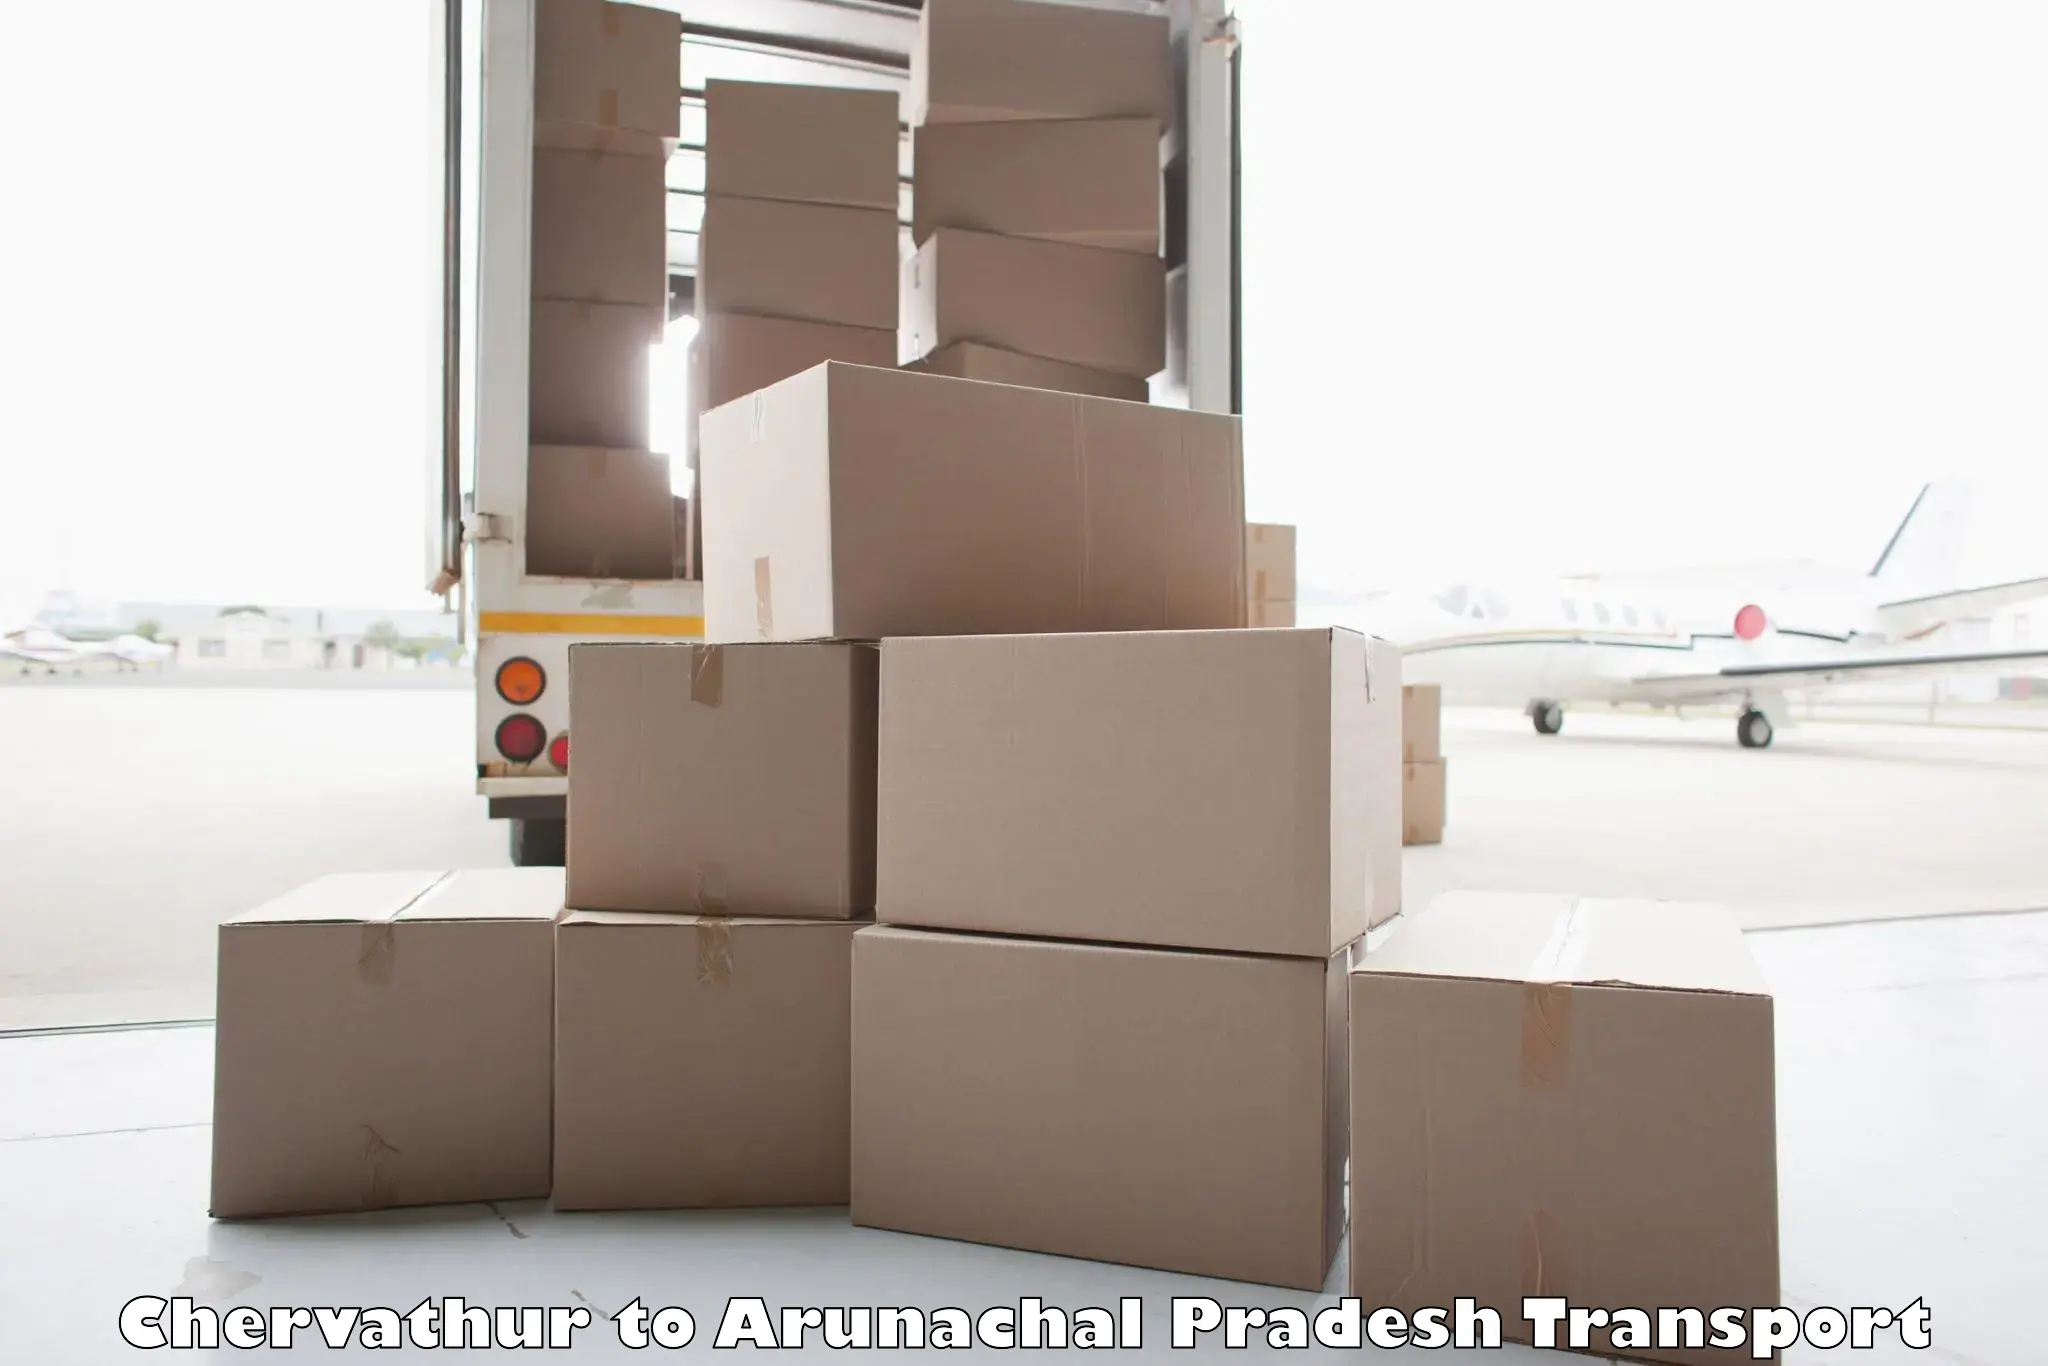 Parcel transport services in Chervathur to Changlang